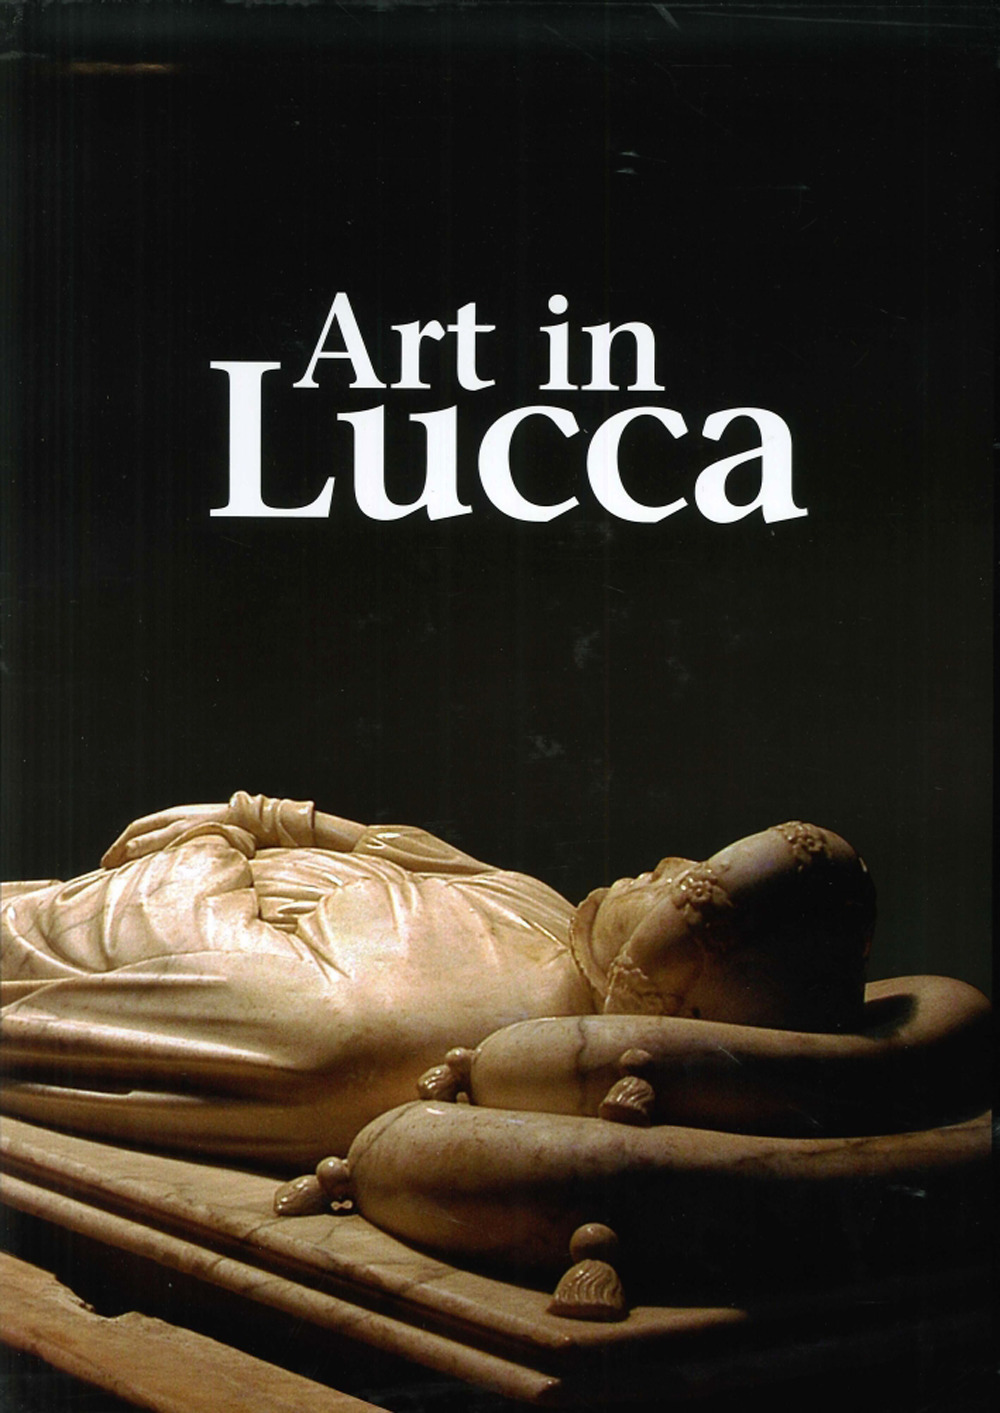 Image of Art in Lucca. A tour through lucchese art from the early Middle Ages to the 20th century